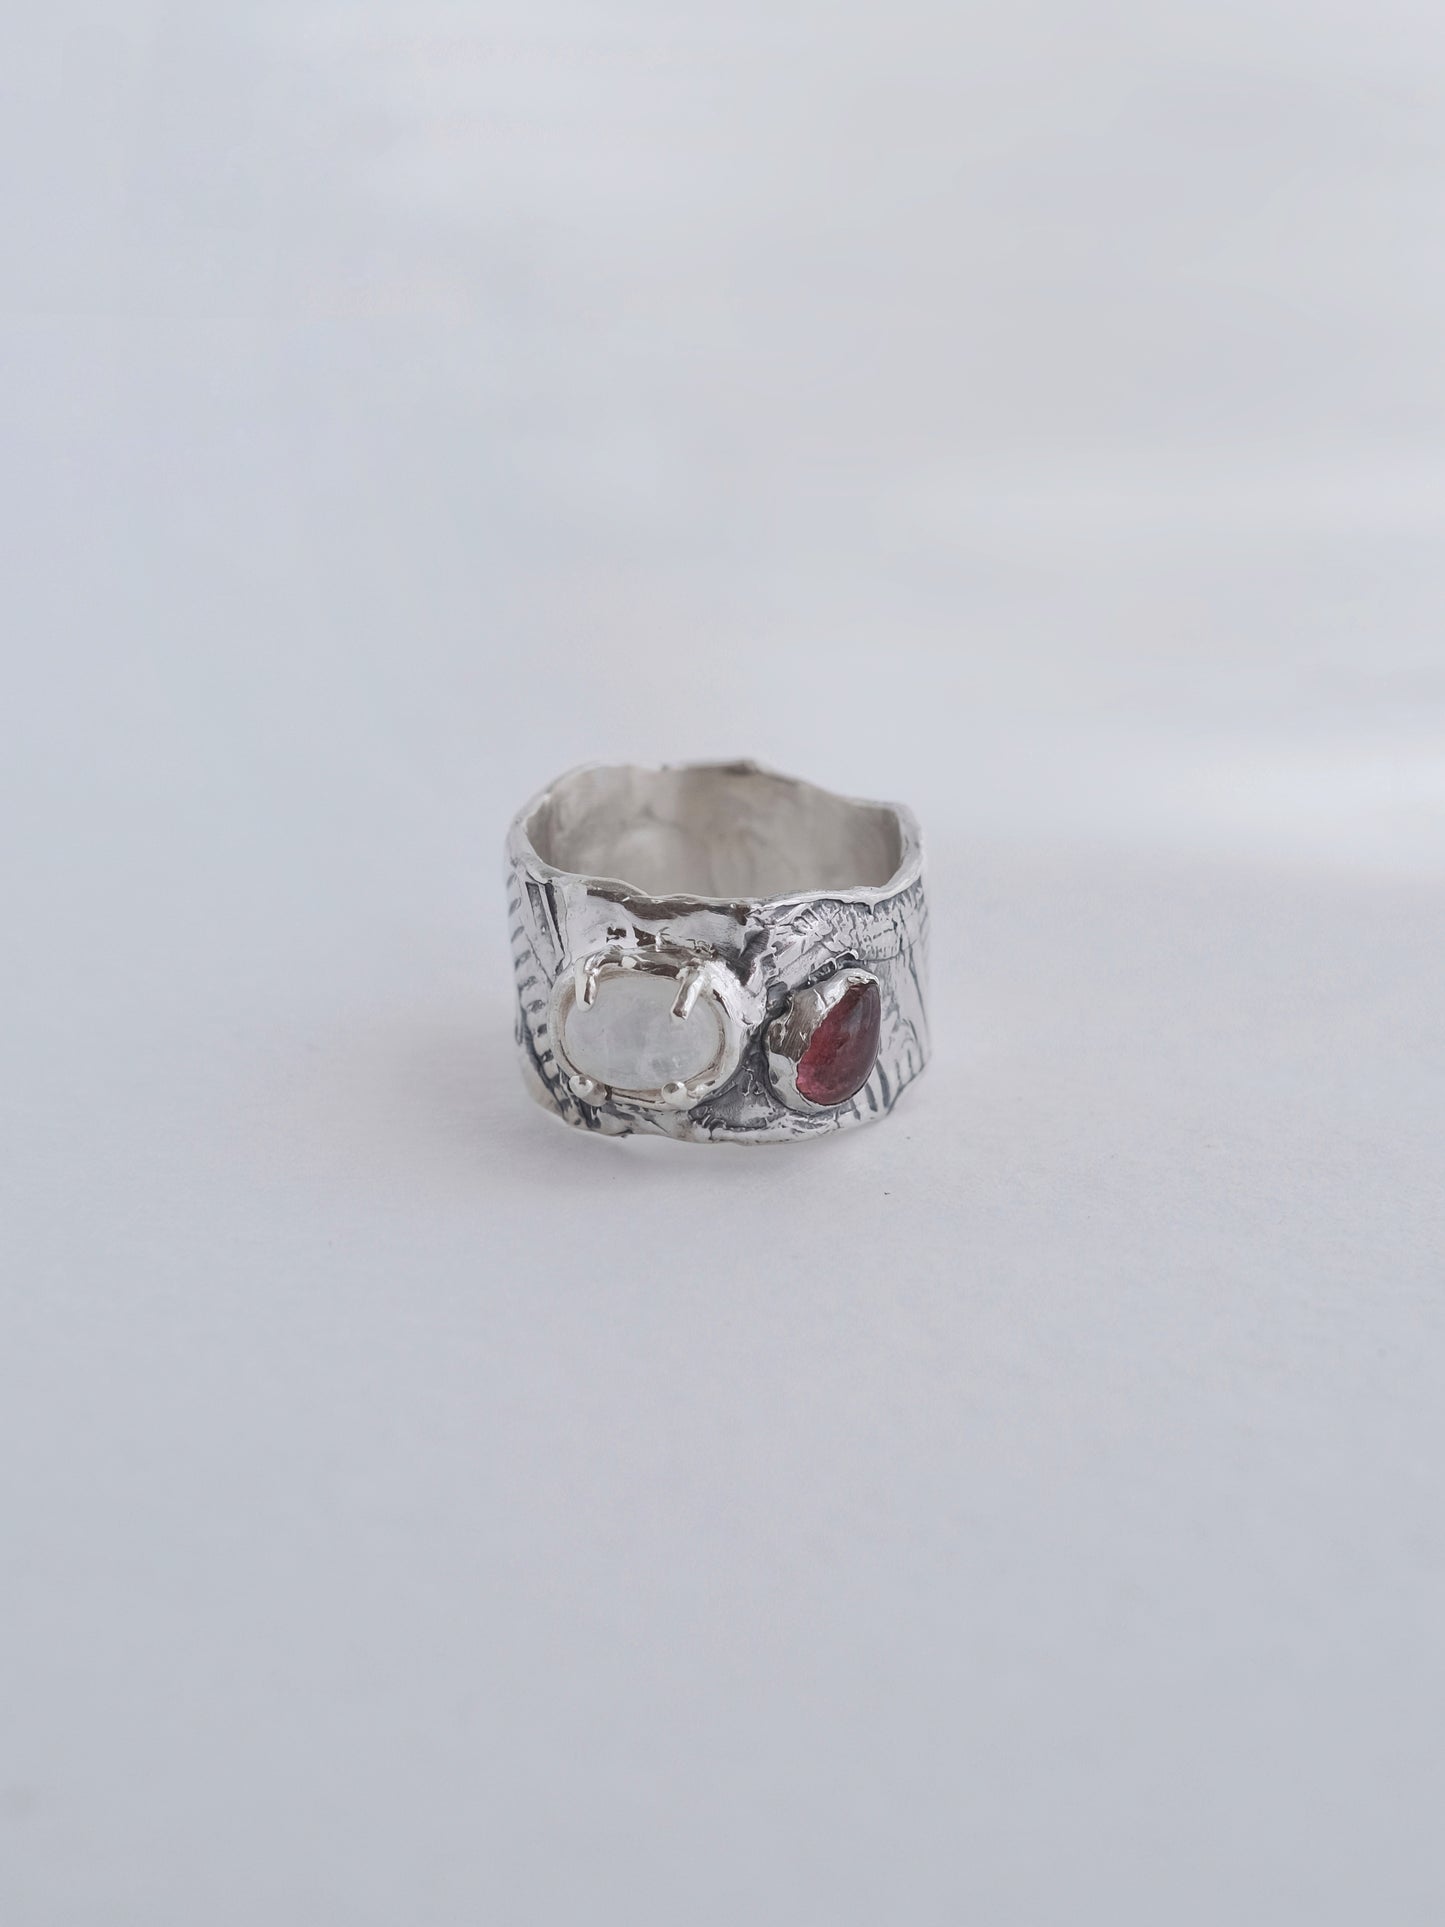 Ring "Fairy tale 24" 6 / M / 16.5